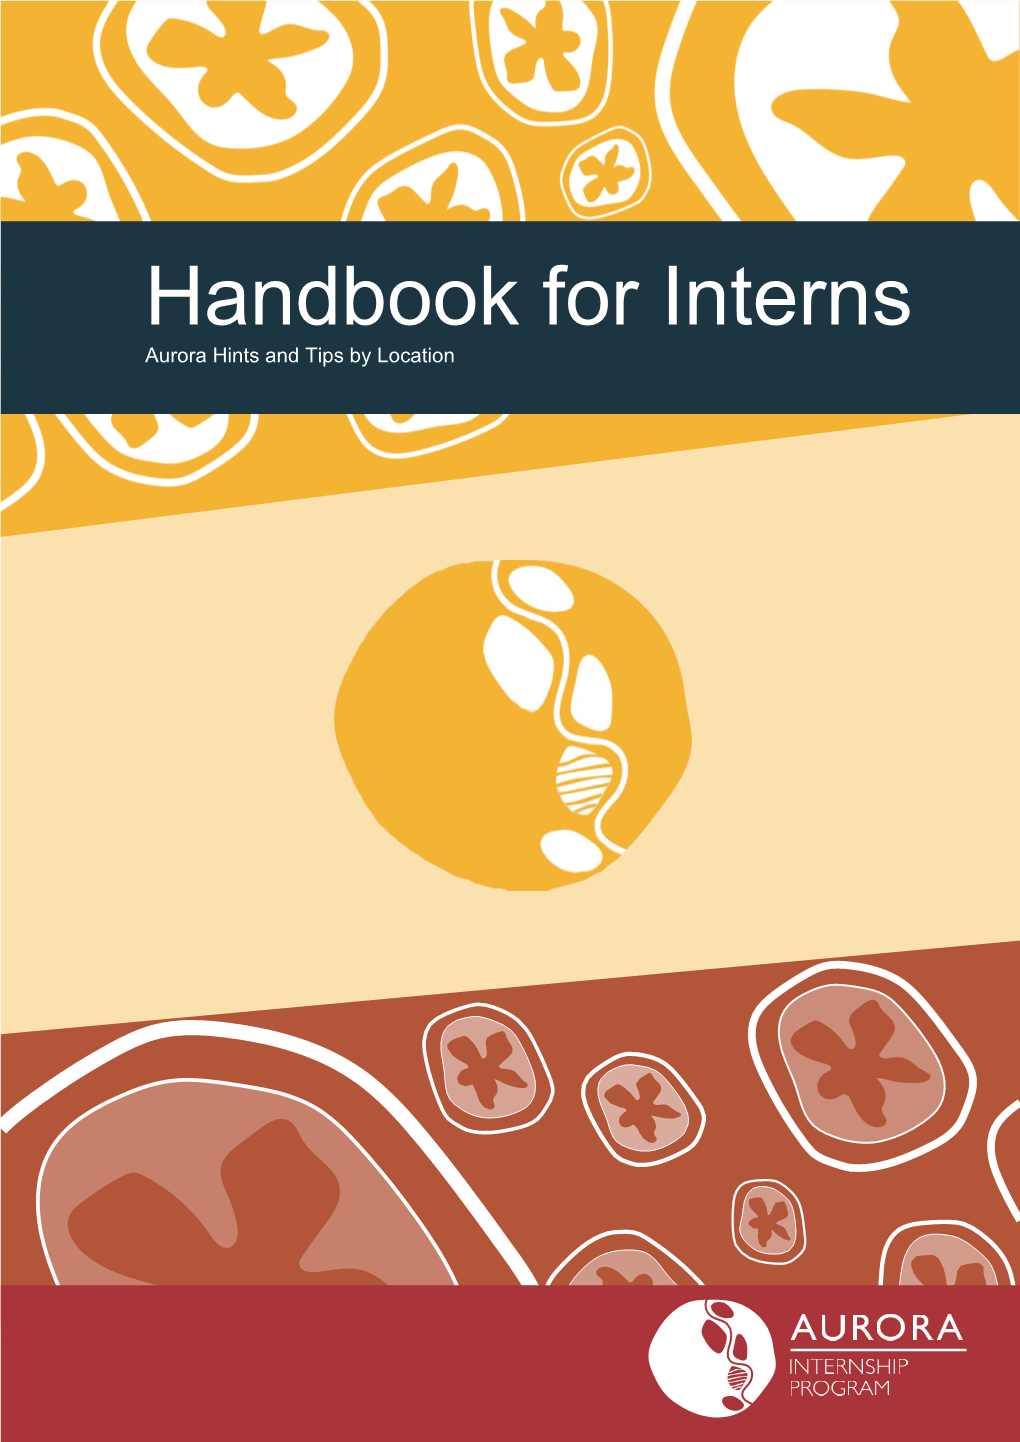 Handbook for Interns Aurora Hints and Tips by Location